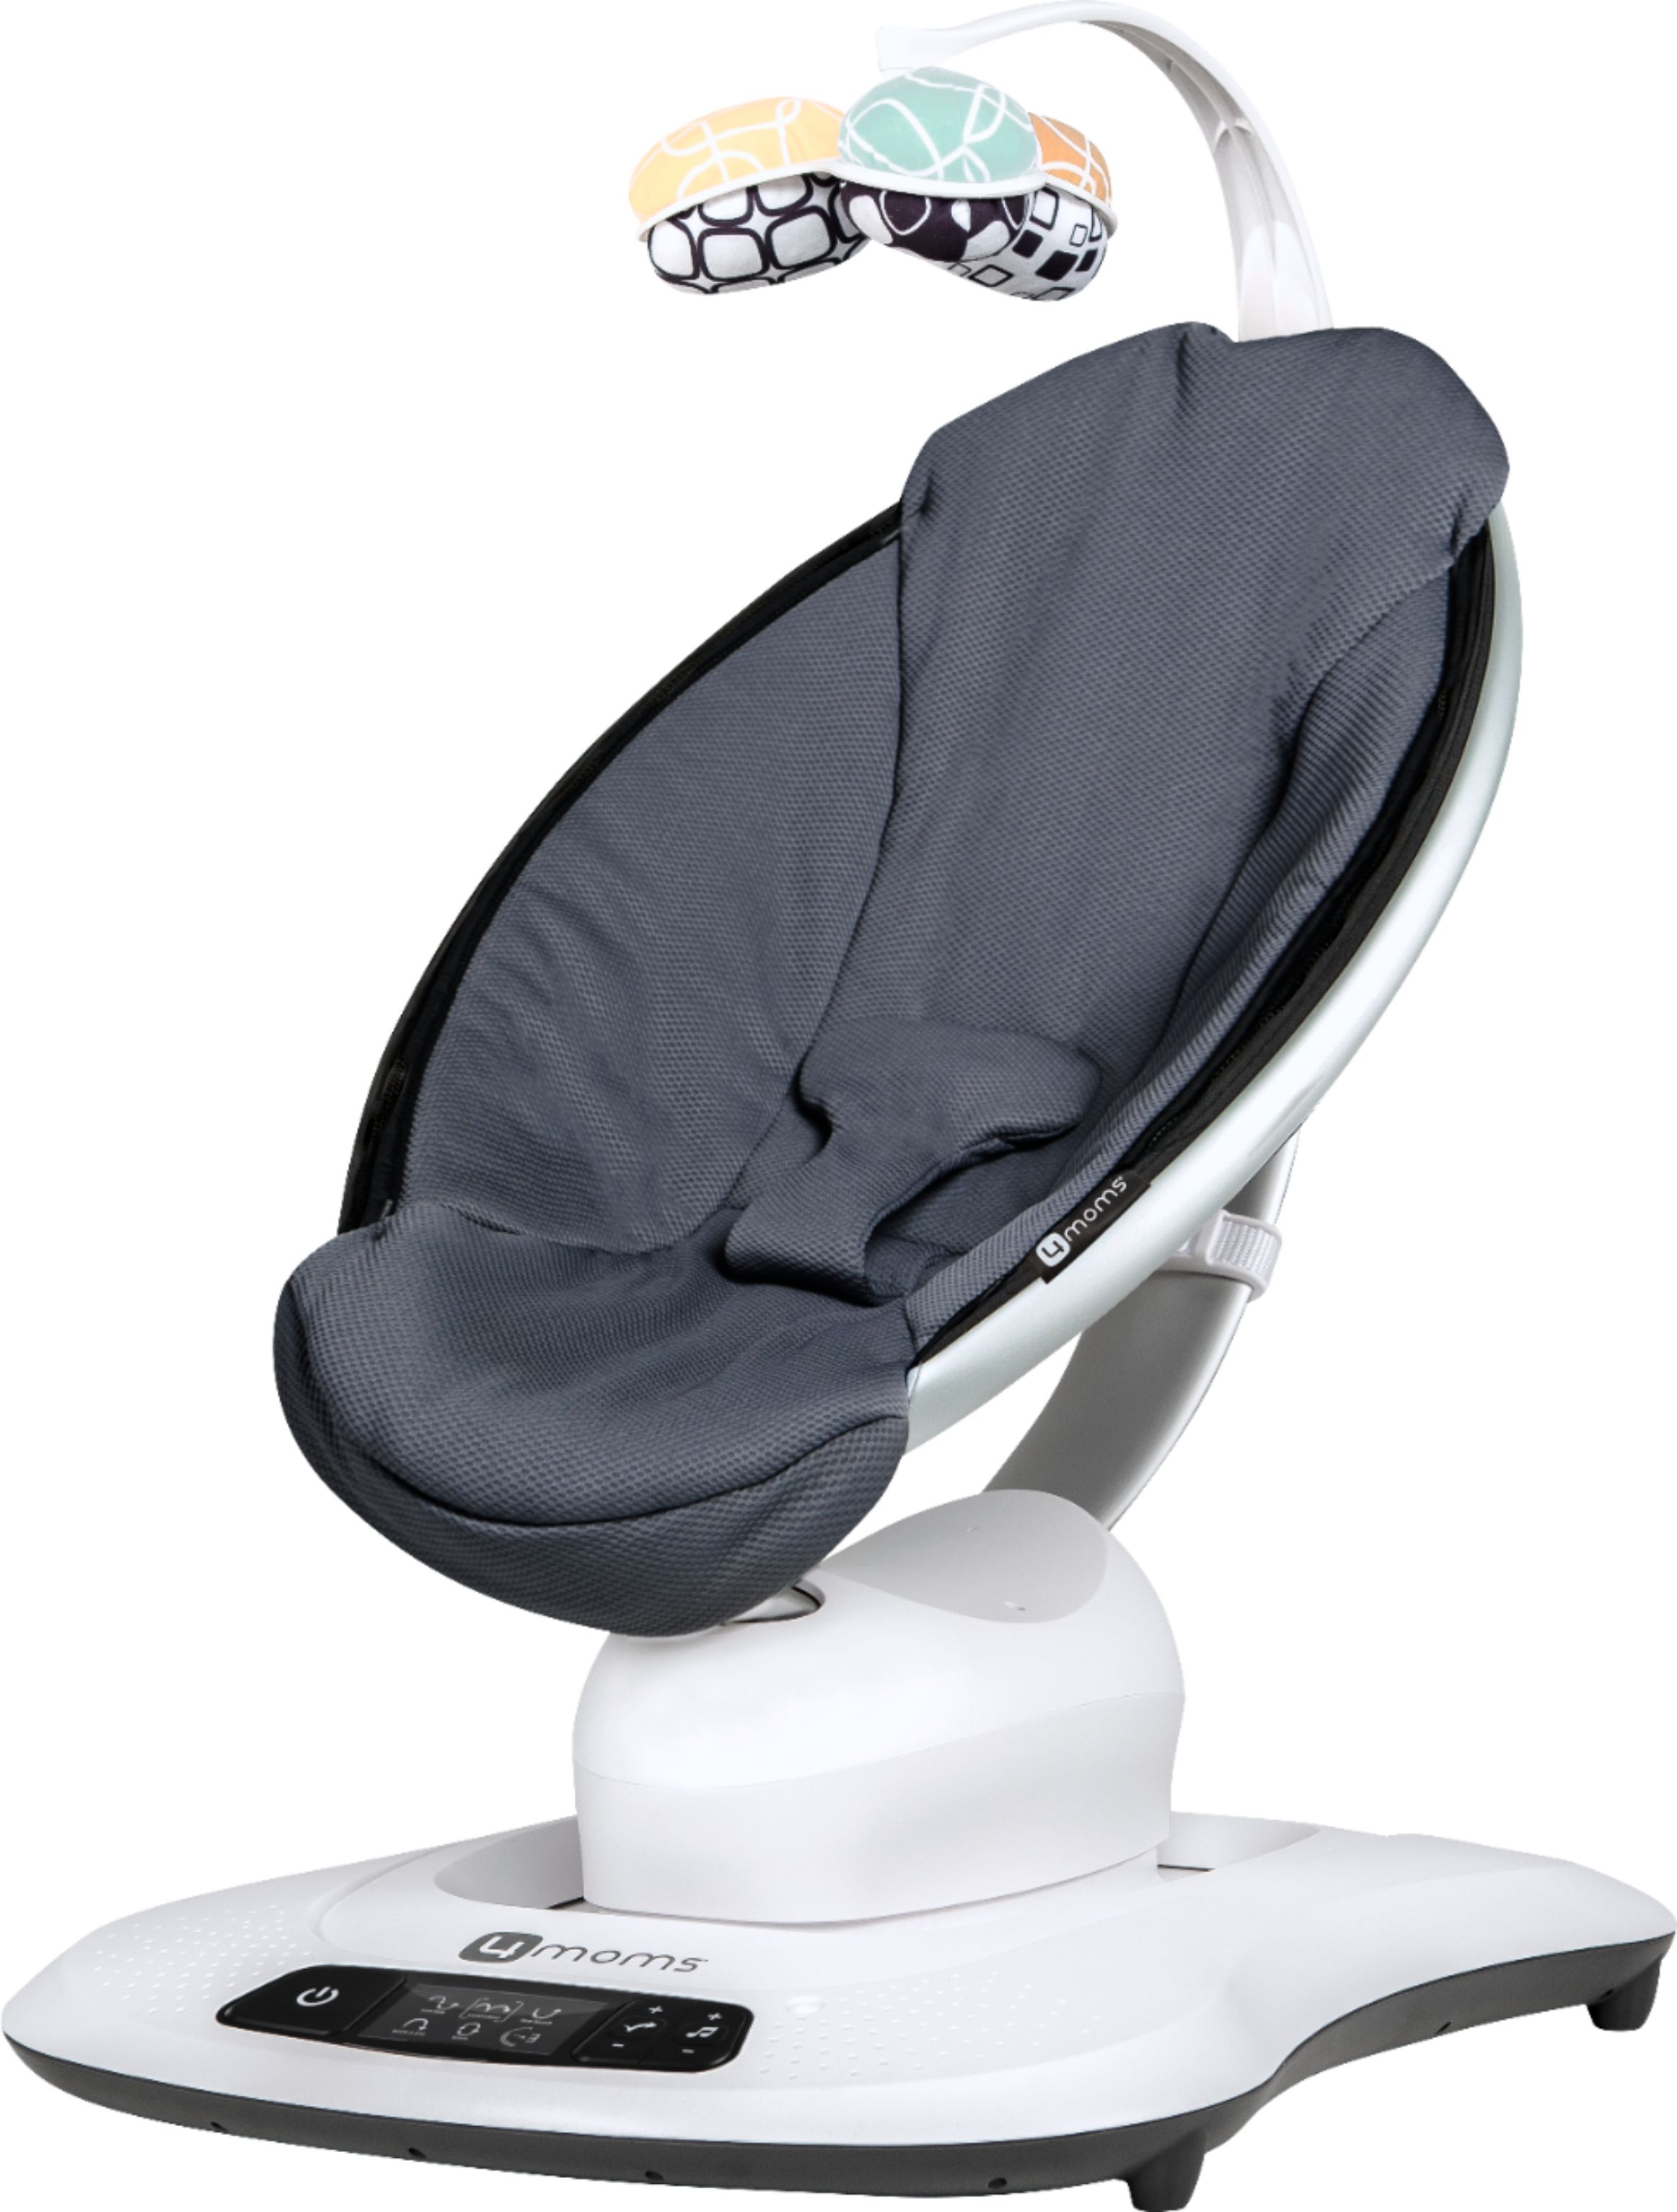 Angle View: 4moms® mamaRoo®4 | 5 unique motions | Bluetooth Enabled Baby Swing | Dark Grey Cool Mesh